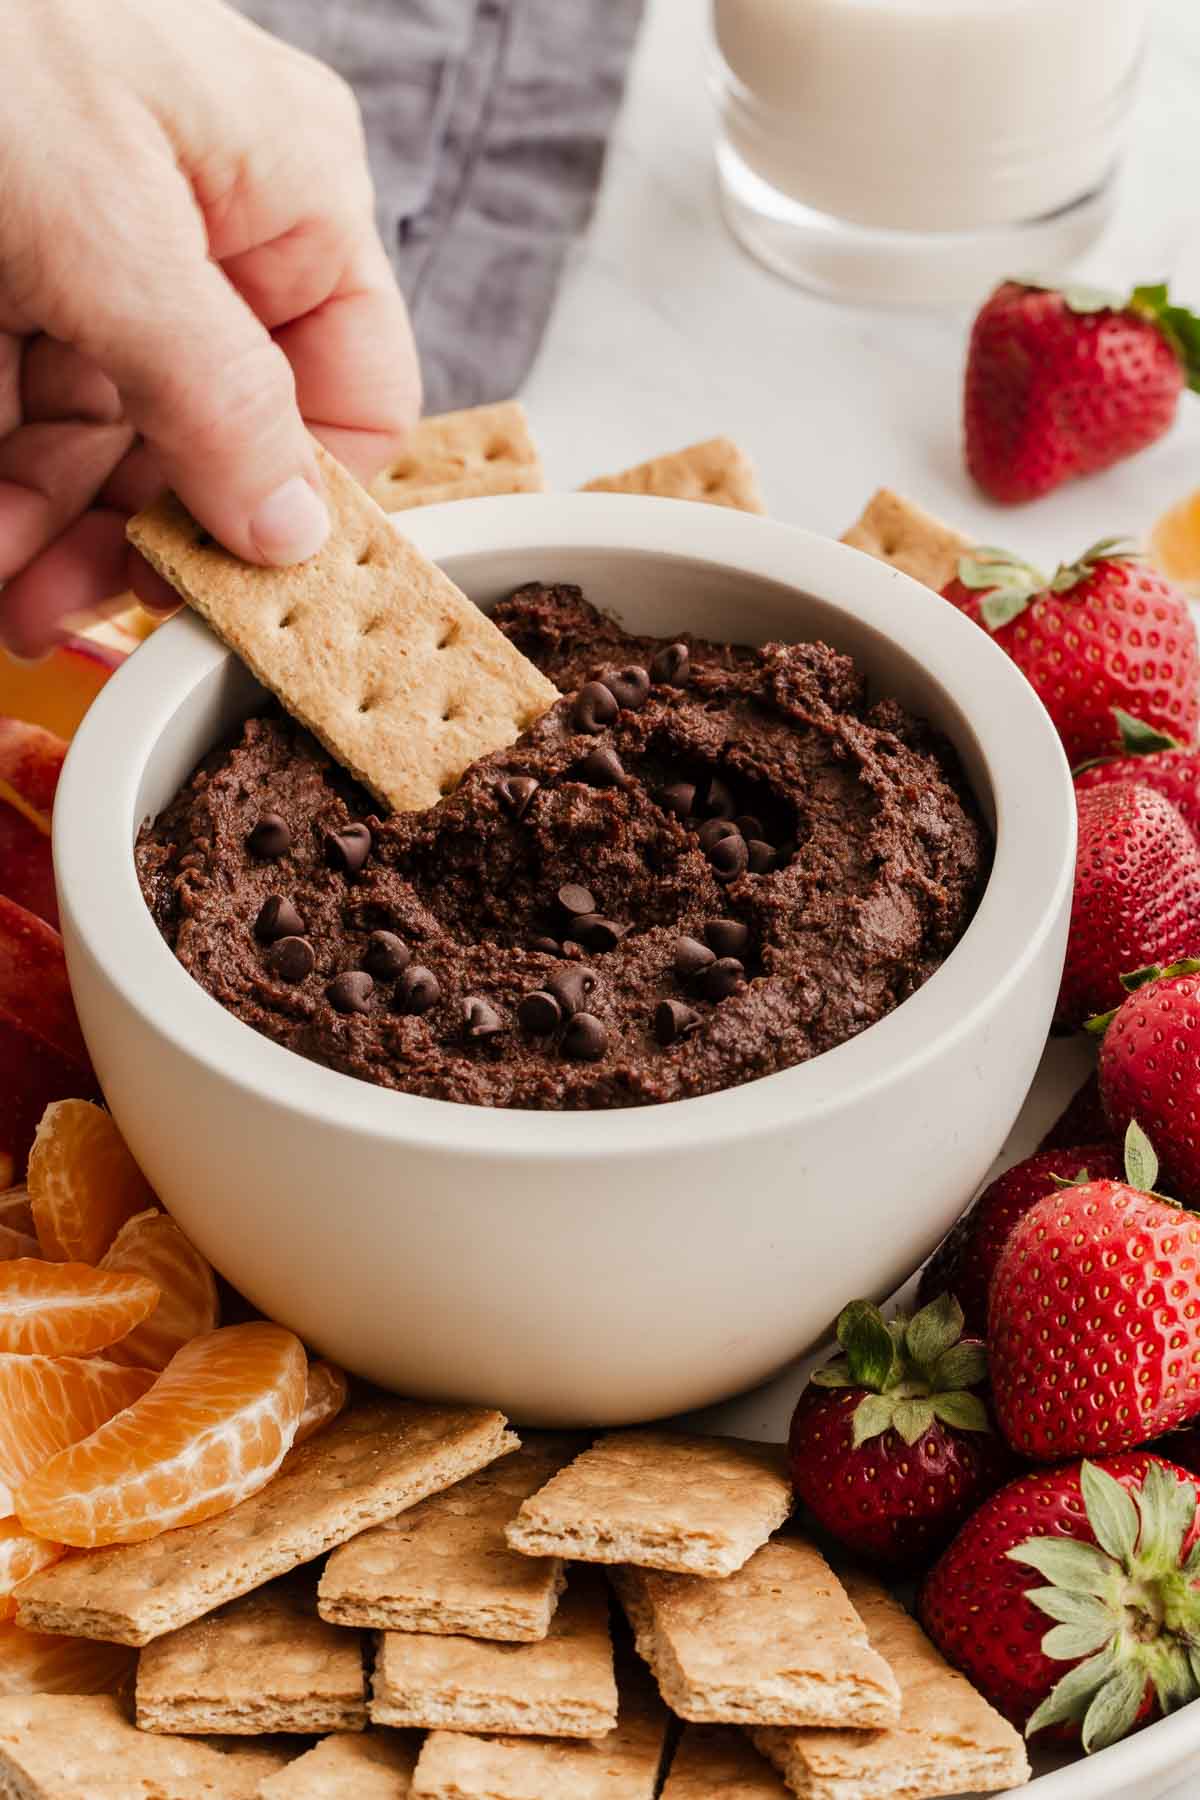 Hand dipping a graham cracker into a bowl of chocolate hummus with mini chocolate chips on top.